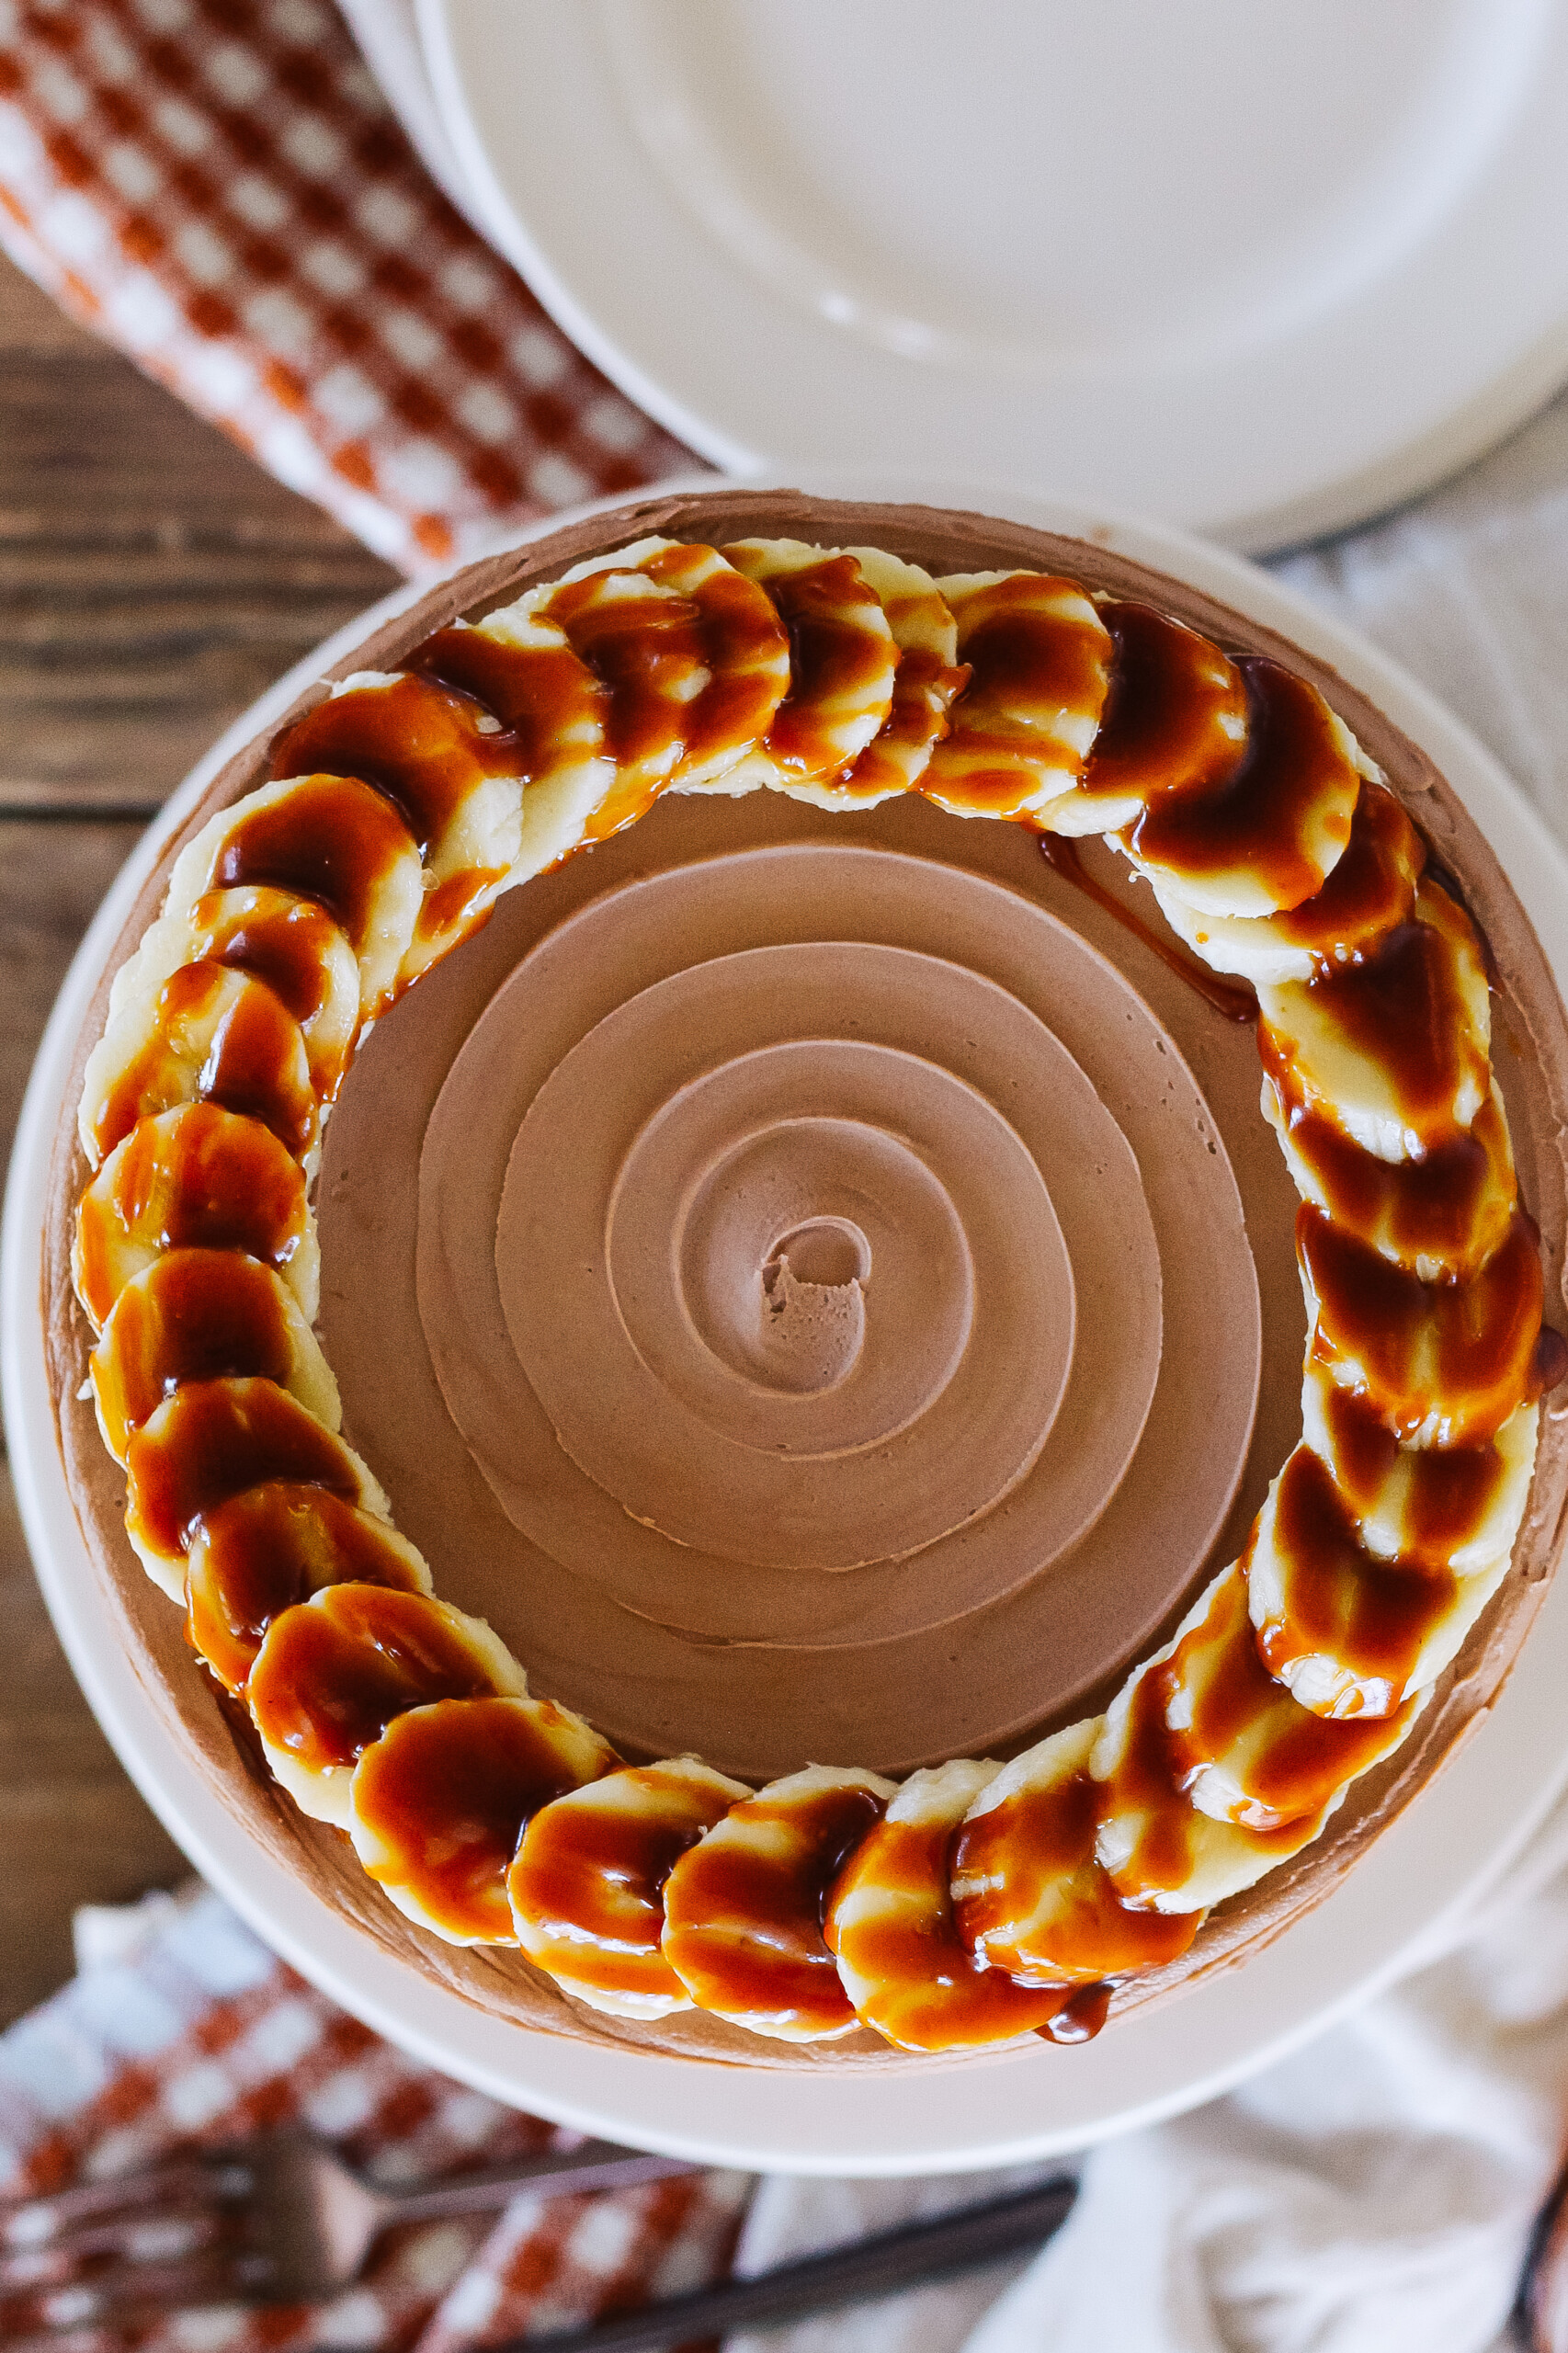 Top view of a cake with bananas and caramel on it.